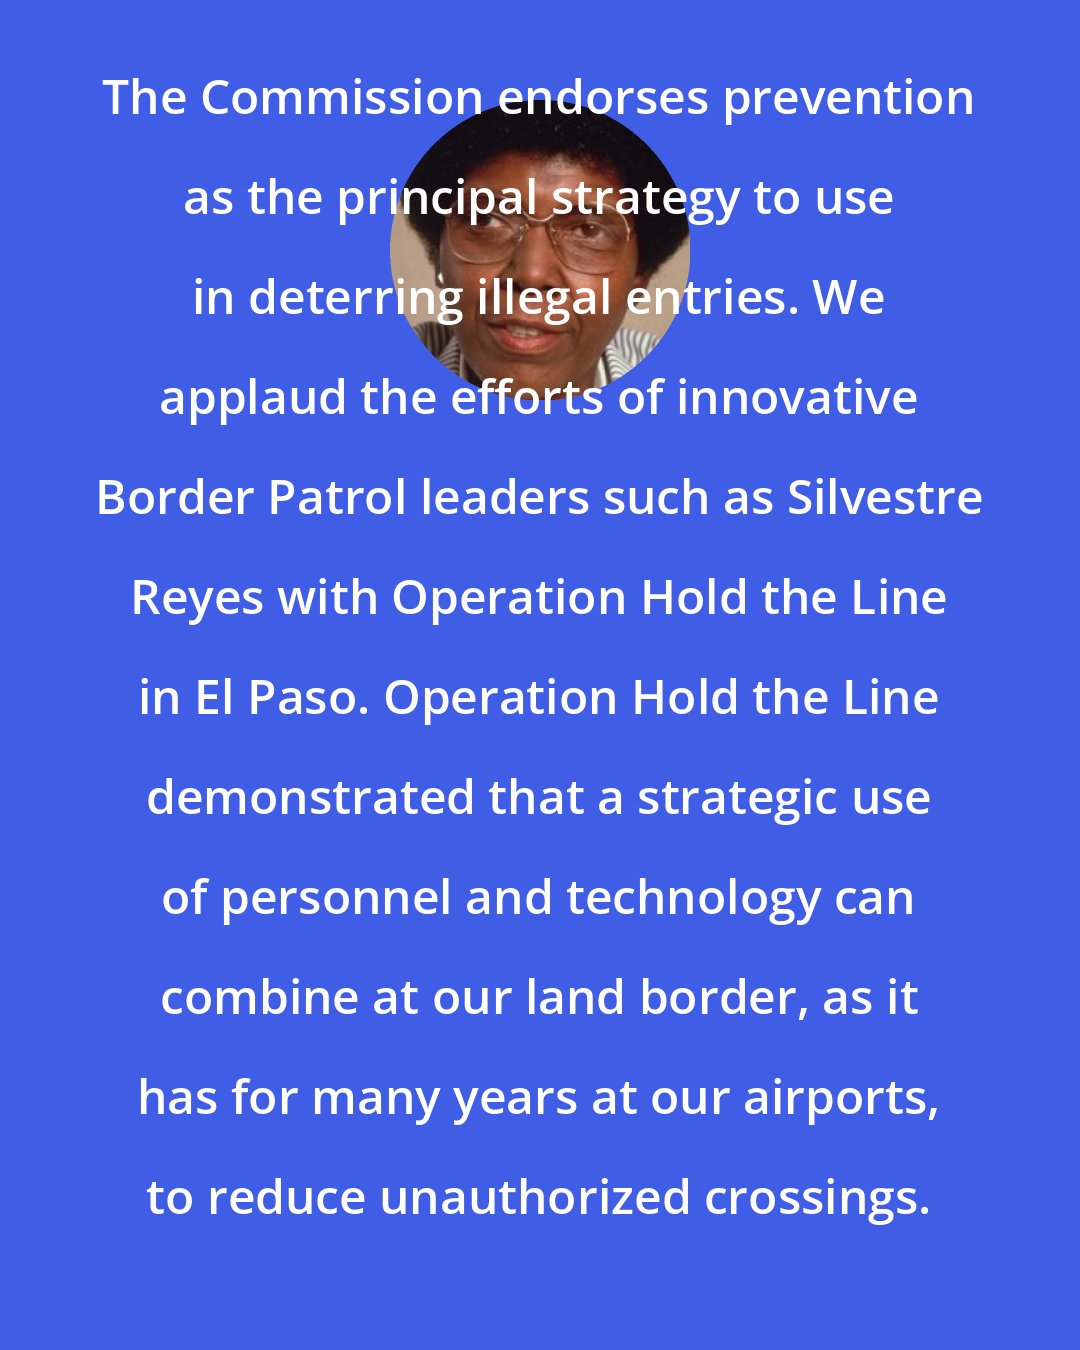 Barbara Jordan: The Commission endorses prevention as the principal strategy to use in deterring illegal entries. We applaud the efforts of innovative Border Patrol leaders such as Silvestre Reyes with Operation Hold the Line in El Paso. Operation Hold the Line demonstrated that a strategic use of personnel and technology can combine at our land border, as it has for many years at our airports, to reduce unauthorized crossings.